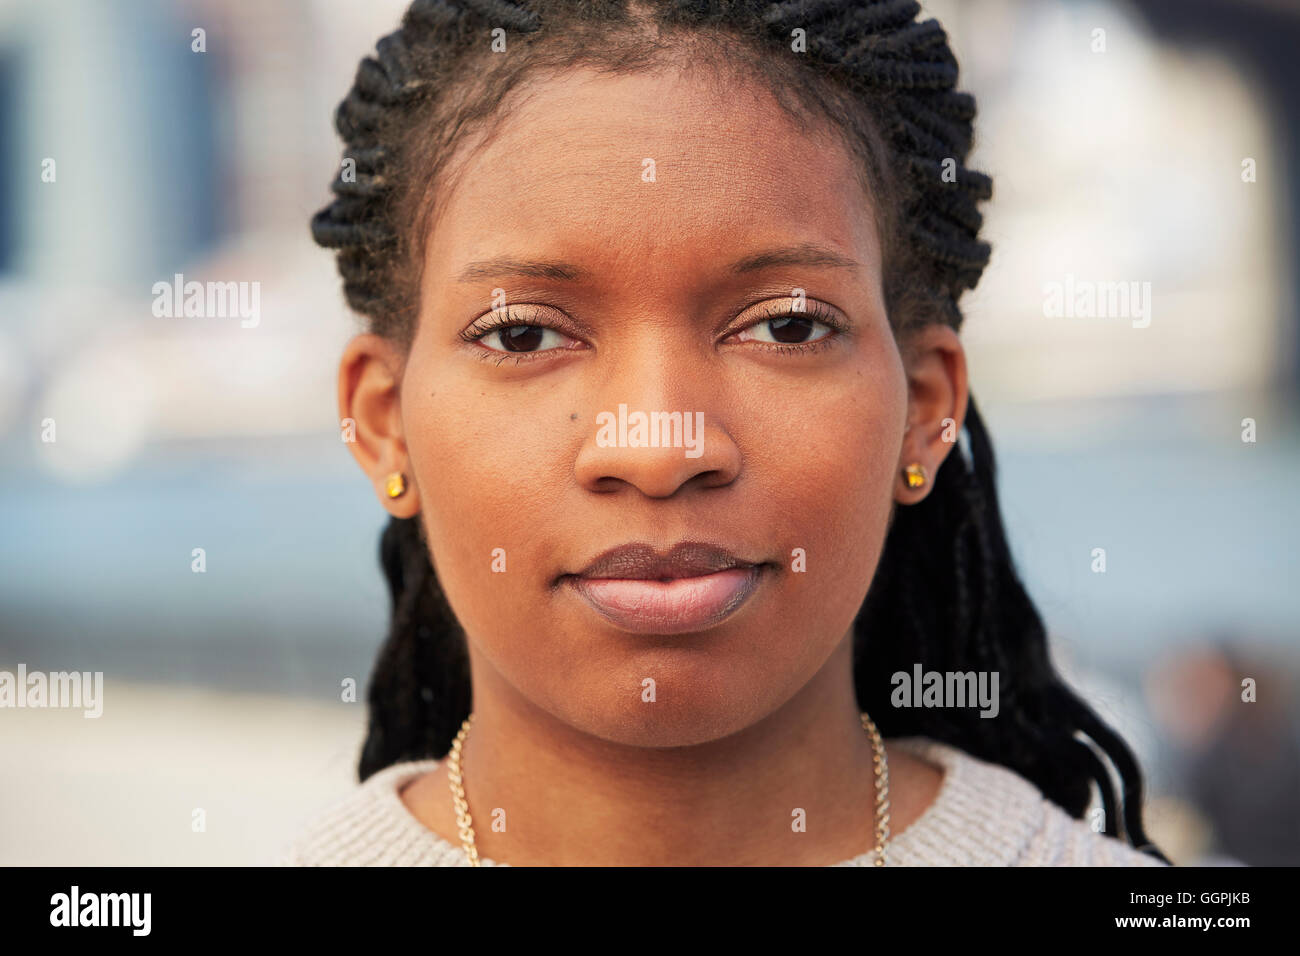 Close up of face of Black woman Stock Photo - Alamy